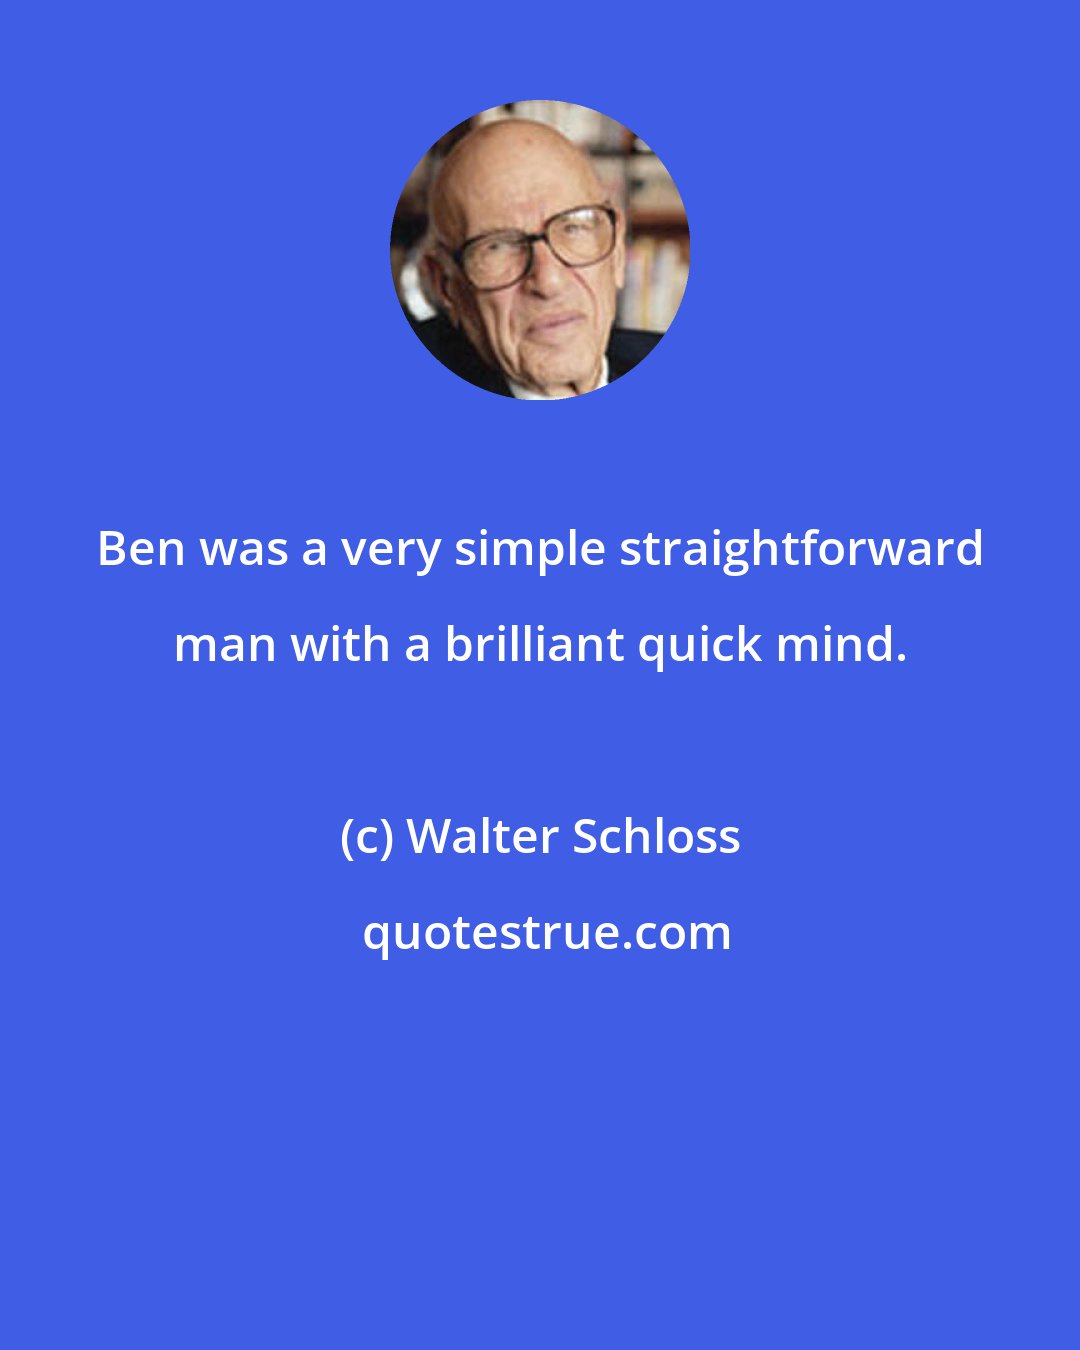 Walter Schloss: Ben was a very simple straightforward man with a brilliant quick mind.